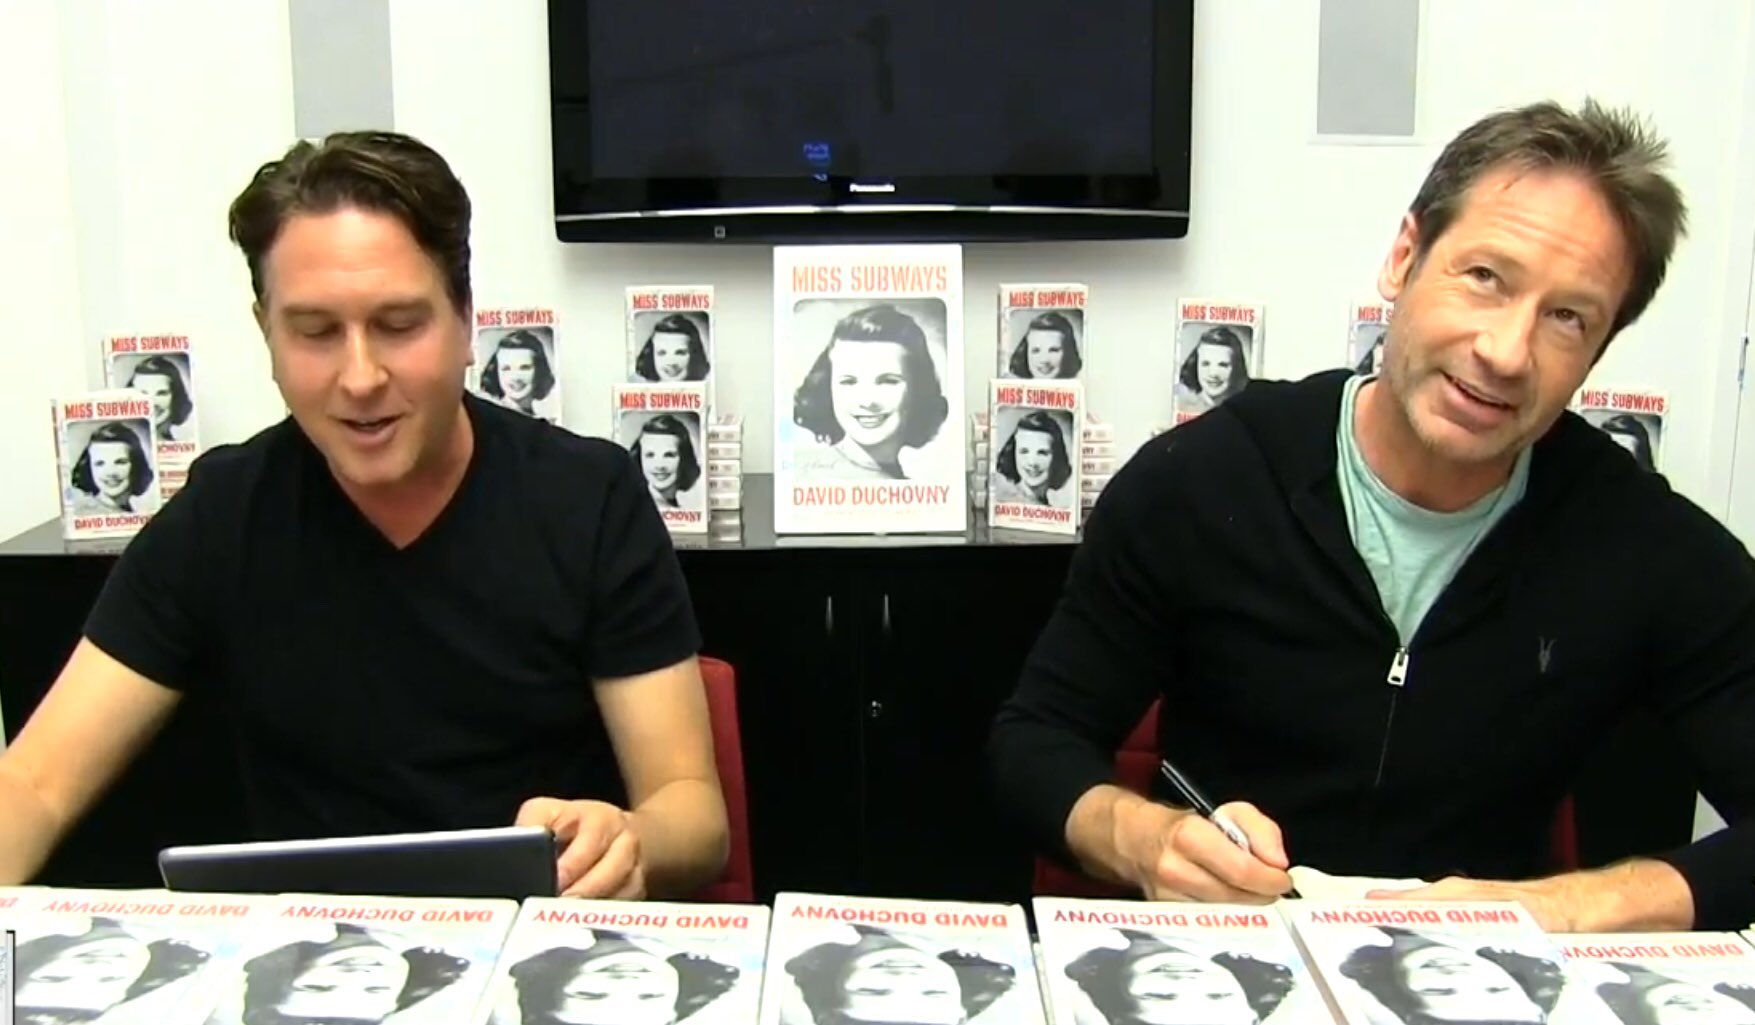 2018/04/30 - Facebook Live Book Signing with David Duchovny DcDgLpFXkAESP9h